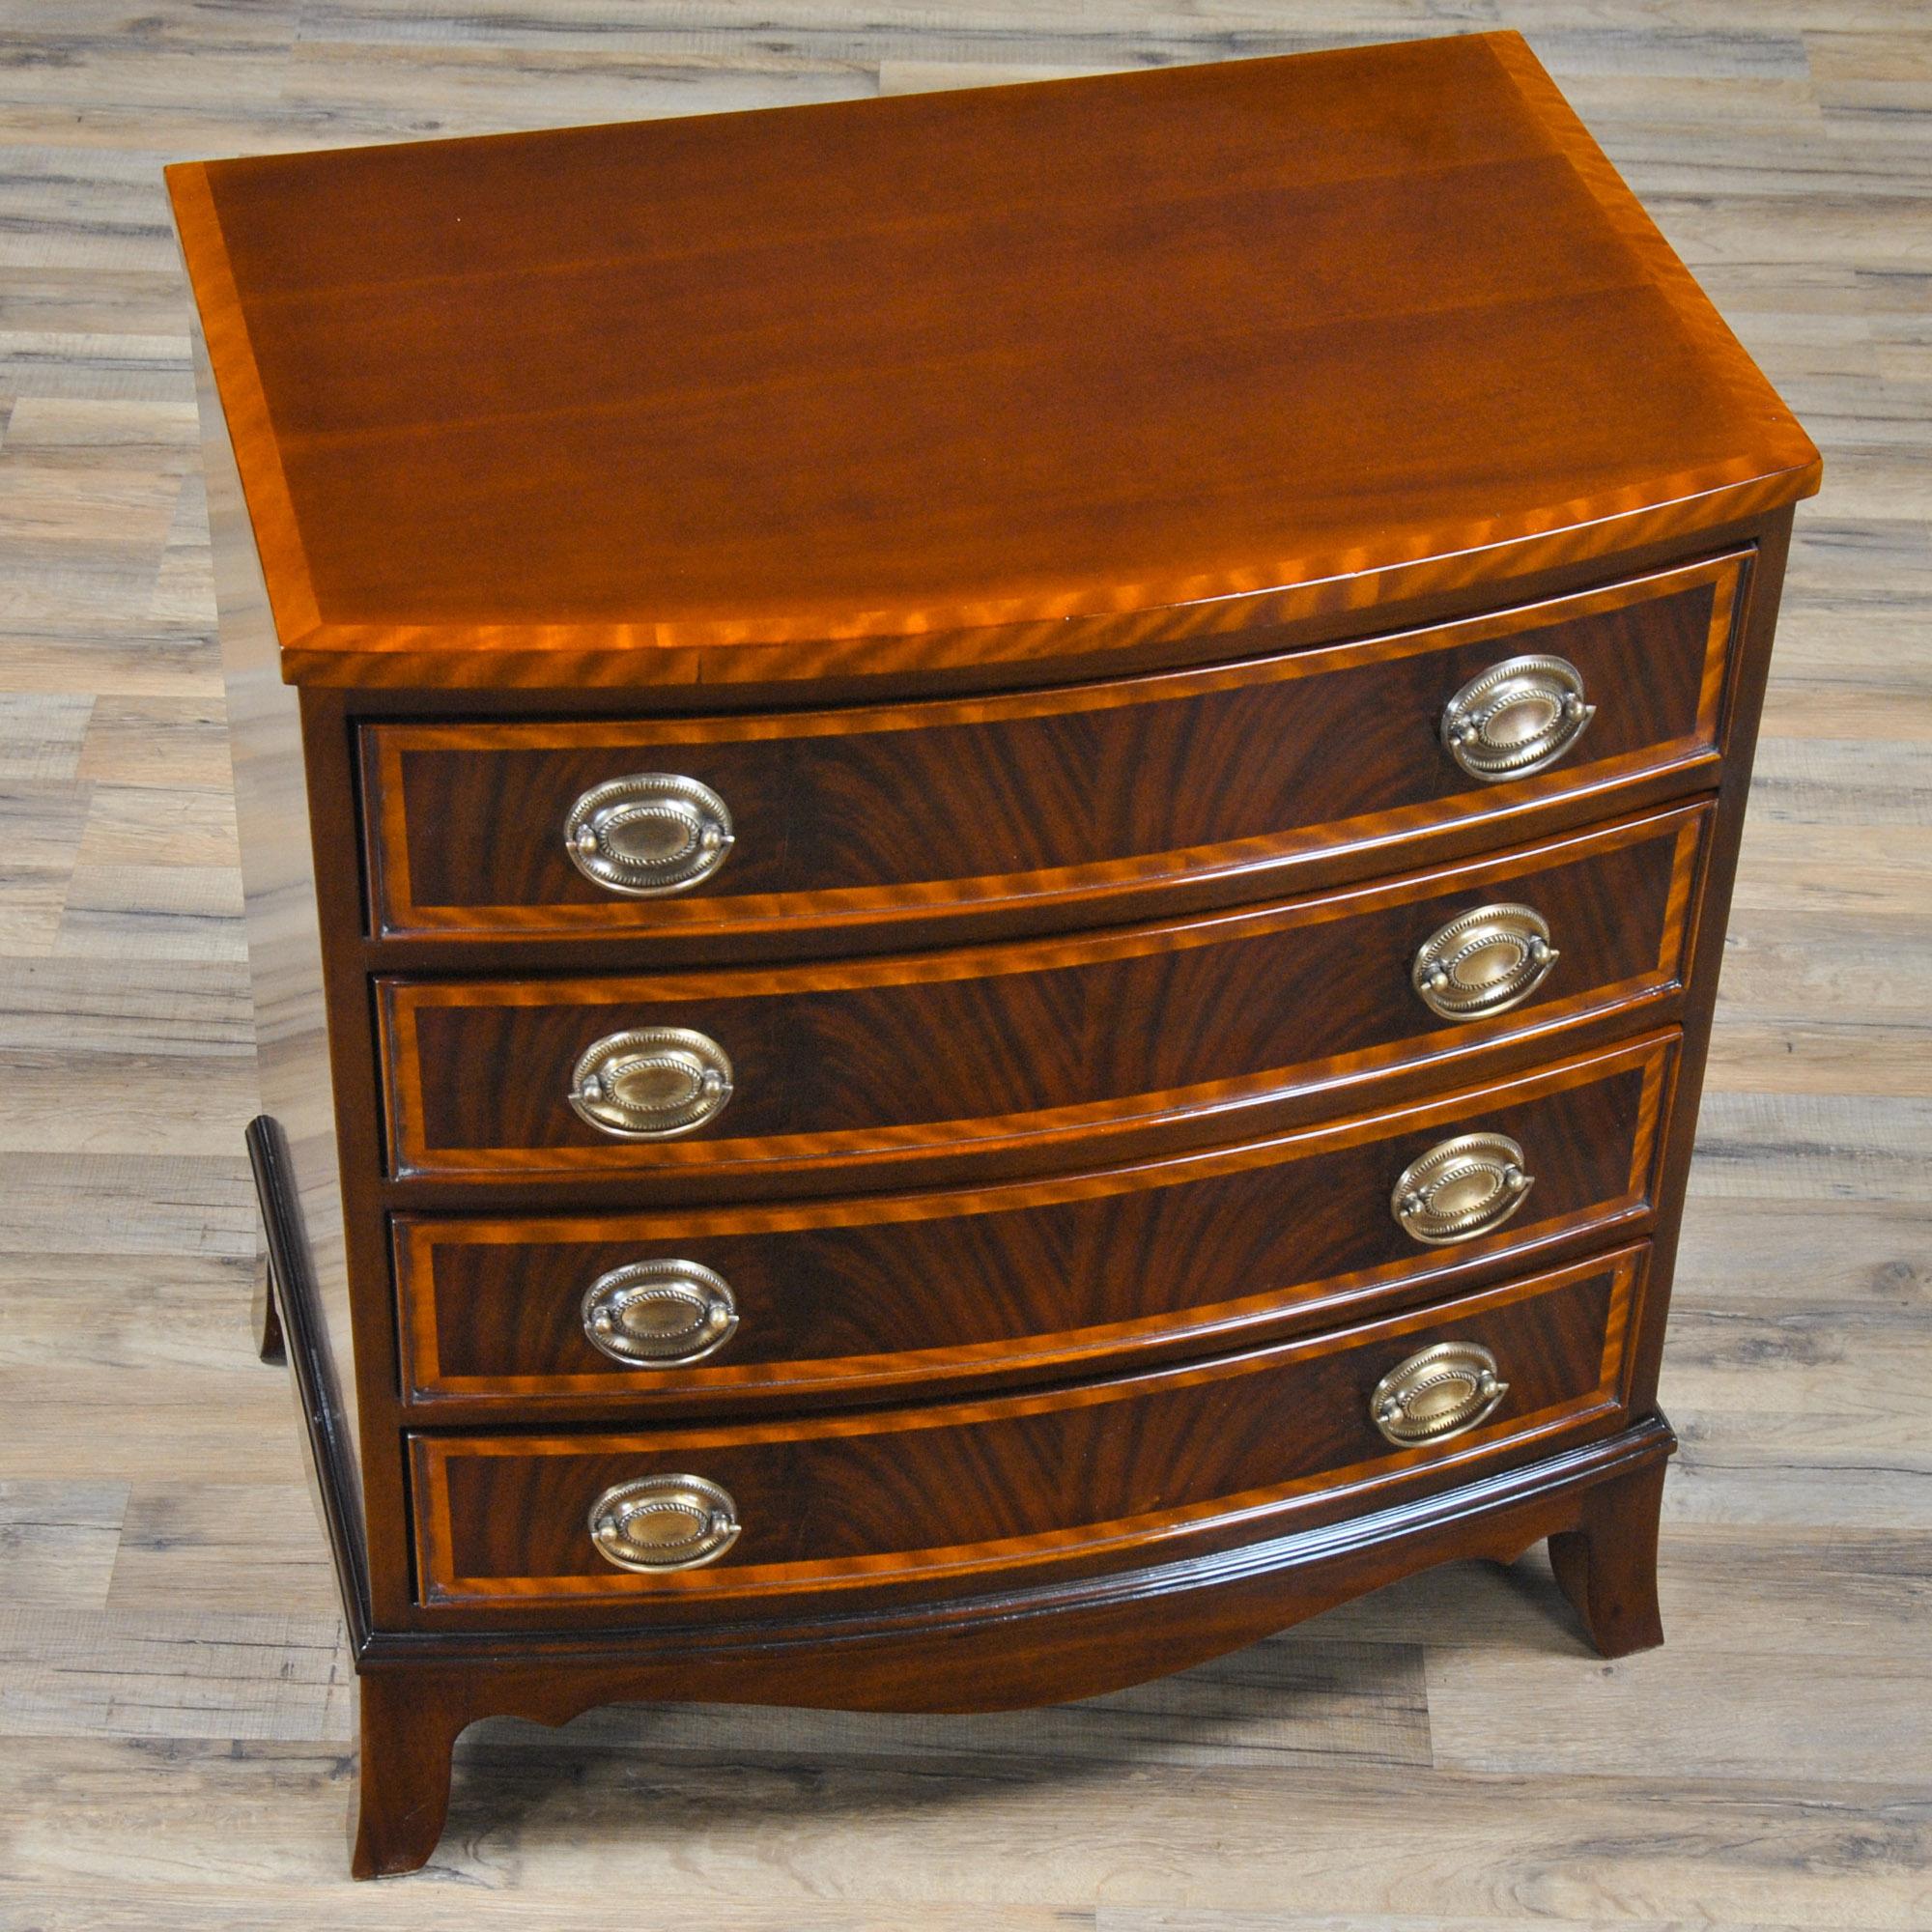 This Banded Mahogany Bowfront Chest from expresses great taste in design from the tastefully tapered legs on the floor to the finely shaped and veneer banded drawer fronts on the front and top. Graduated drawers, great mahogany and satinwood veneers